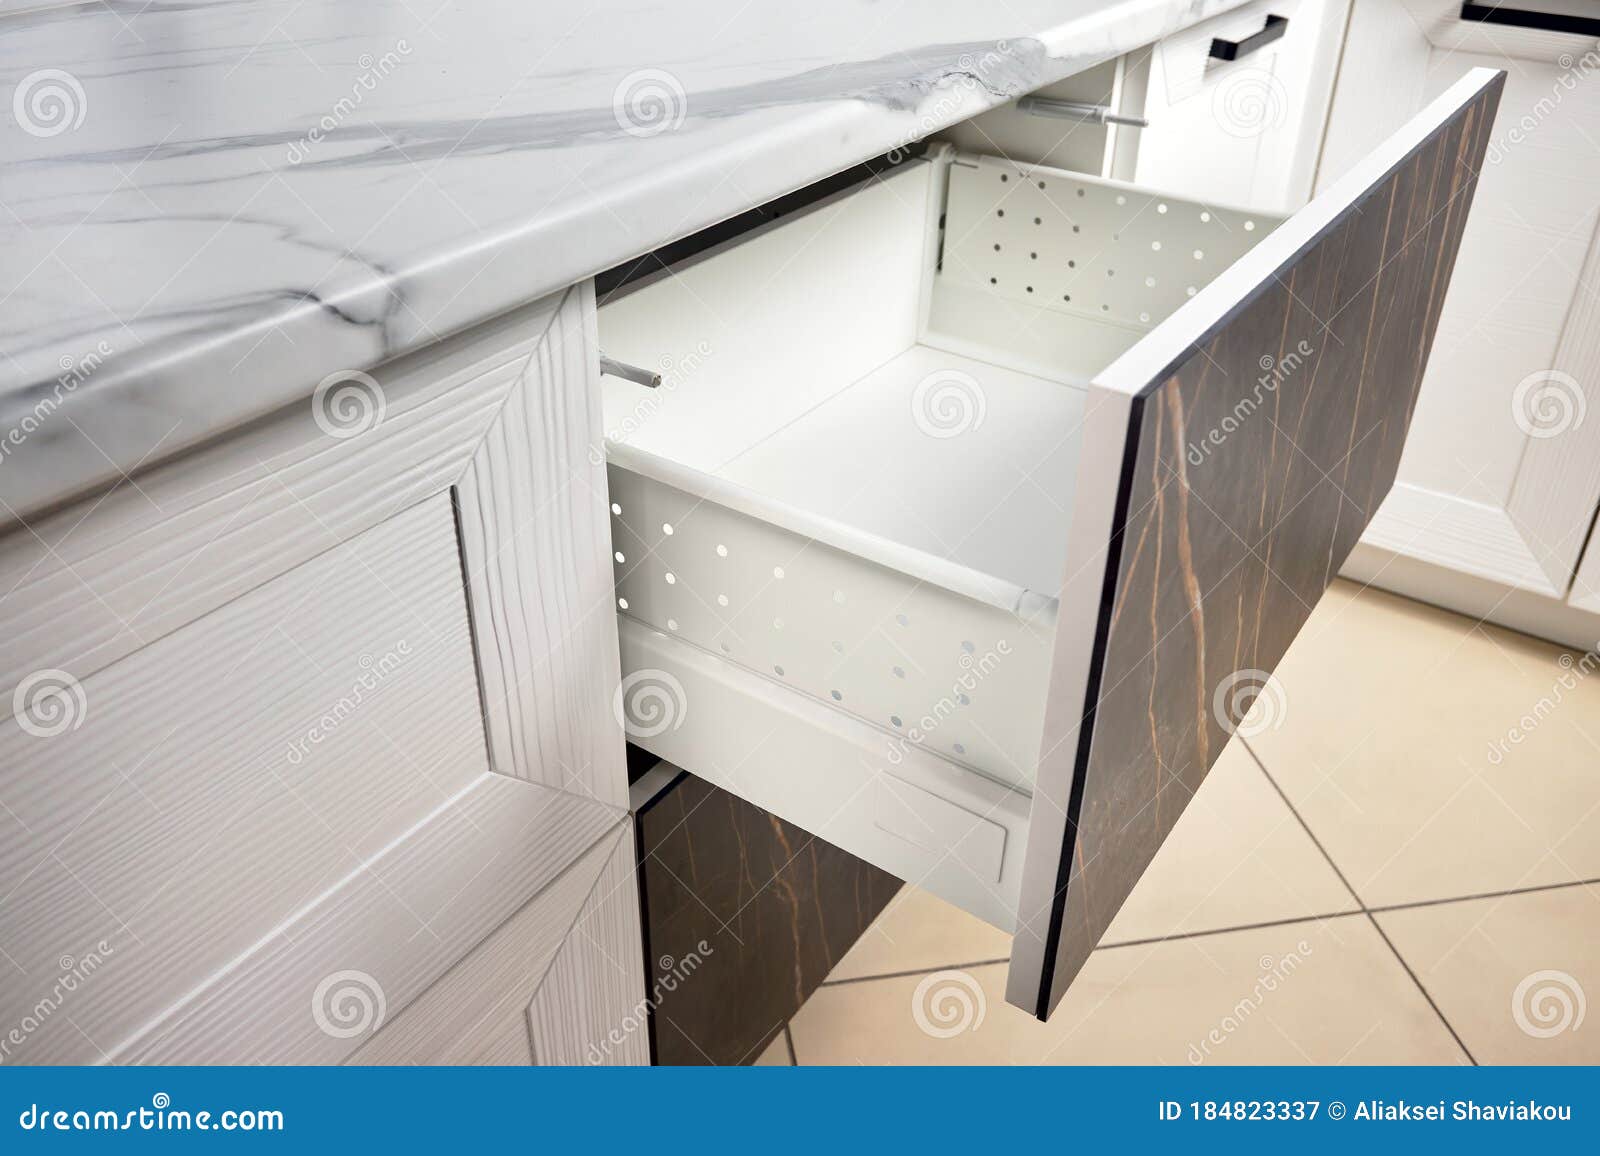 kitchen cabinet door drawer with soft quiet closer damper buffers cushion, solution to slow down closing action of cupboard,